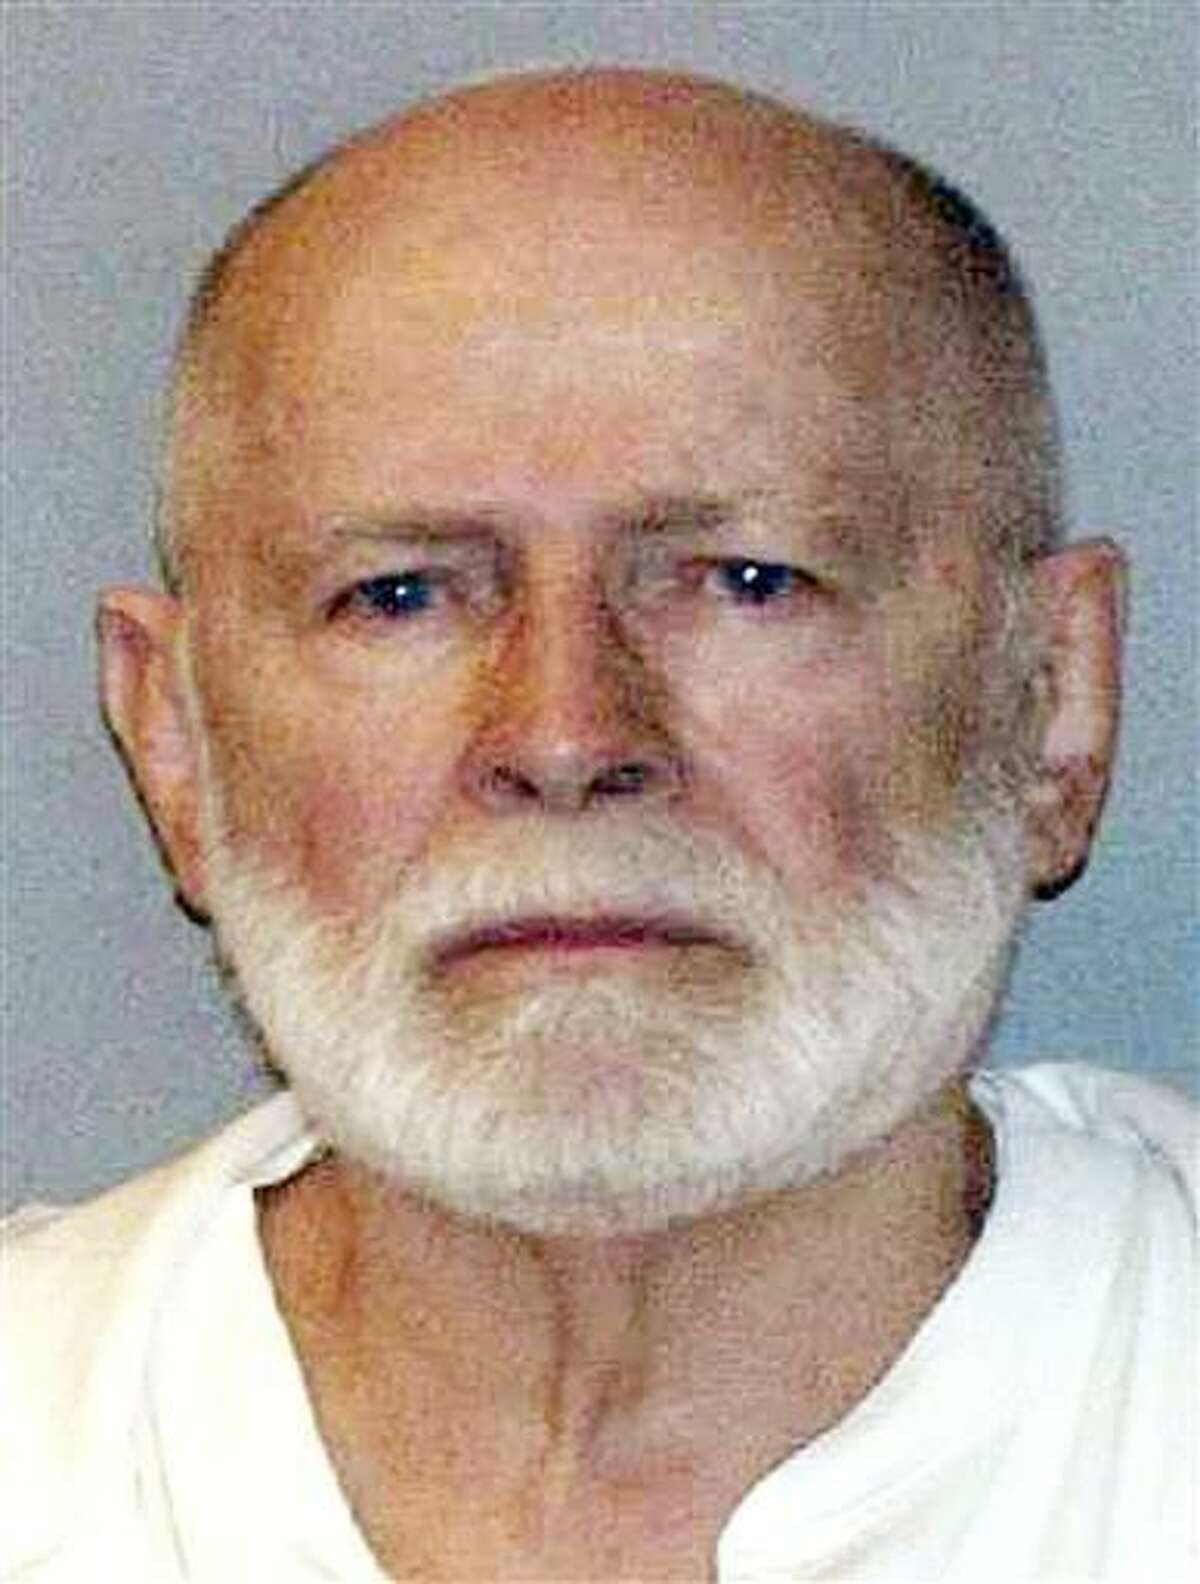 This file June 23, 2011, booking photo provided by the U.S. Marshals Service shows James "Whitey" Bulger. He was convicted in Boston federal court in August 2013 of multiple murders and other crimes. The U.S. Marshals Service will auction items belonging to Bulger and his girlfriend Catherine Greig on Saturday, June 25, 2016. The proceeds will be divided among the families of Bulger's victims. (AP Photo/U.S. Marshals Service)